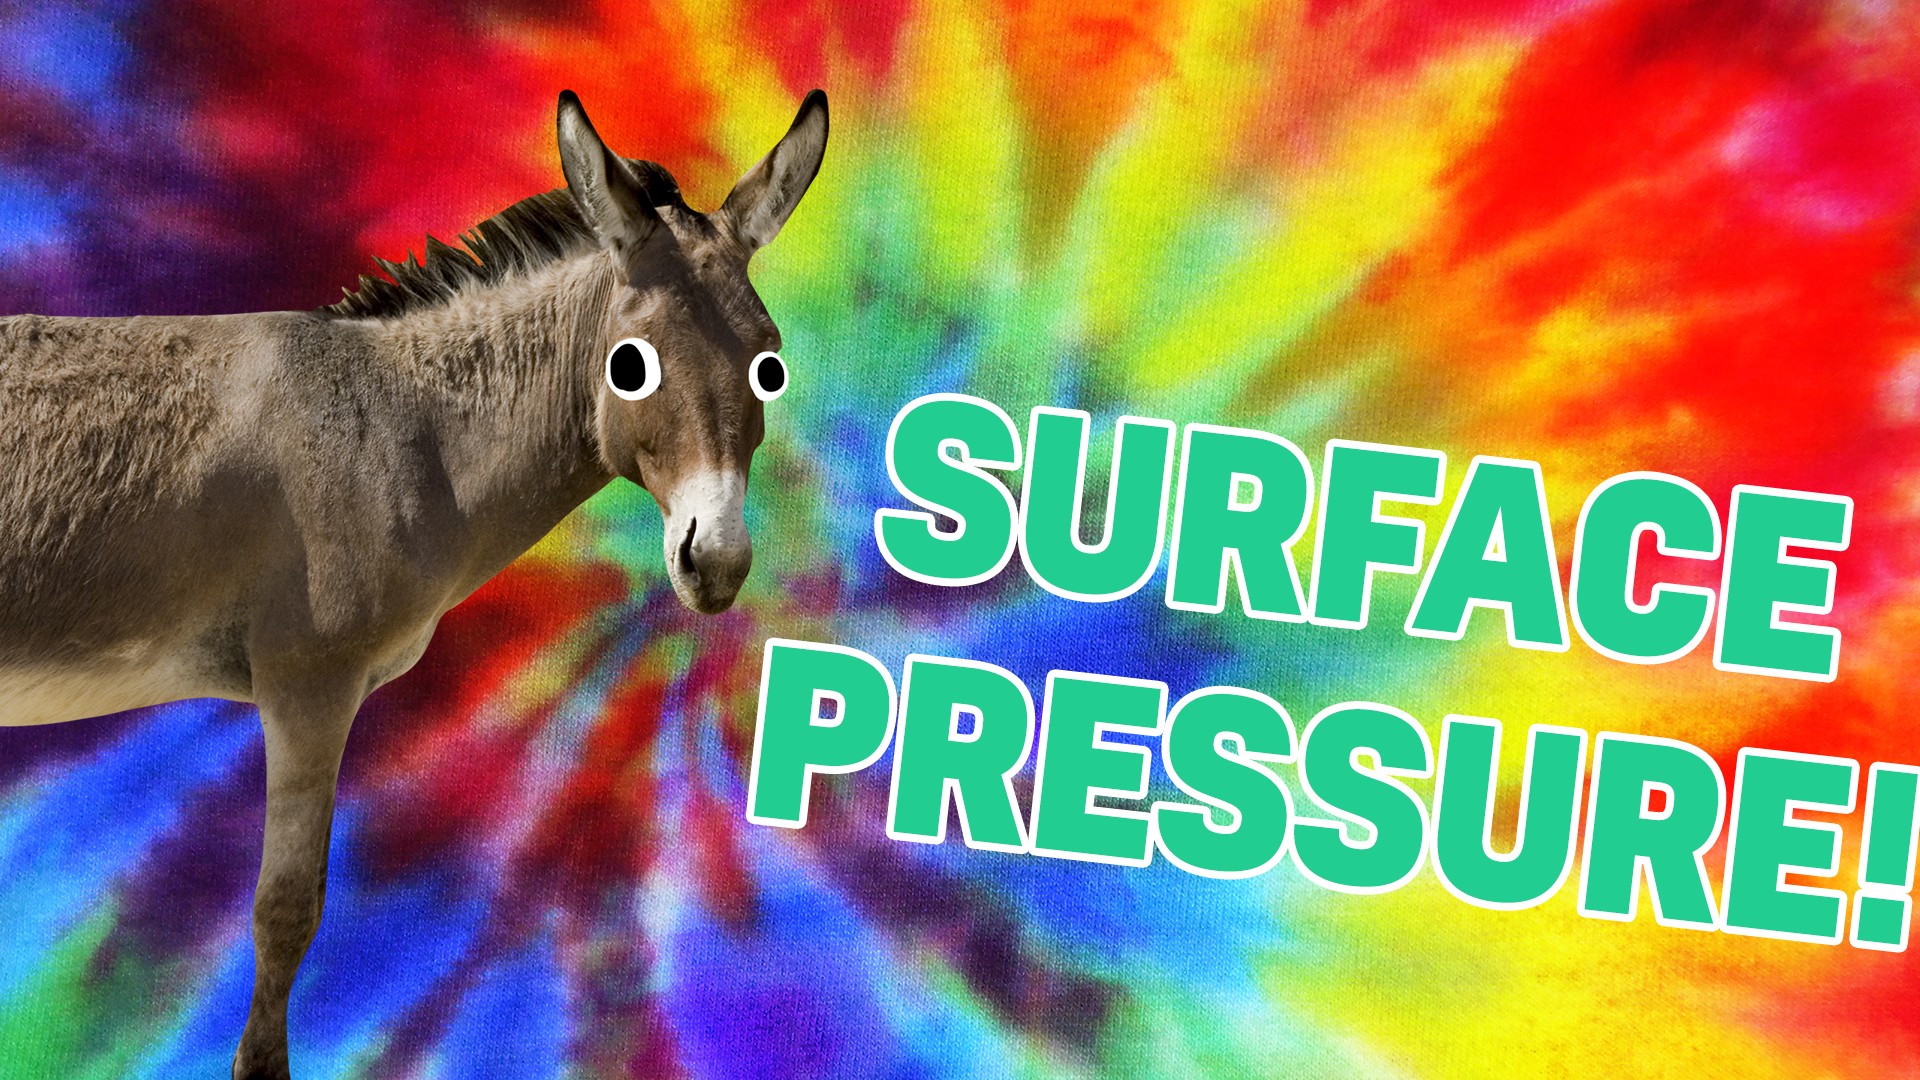 Surface pressure